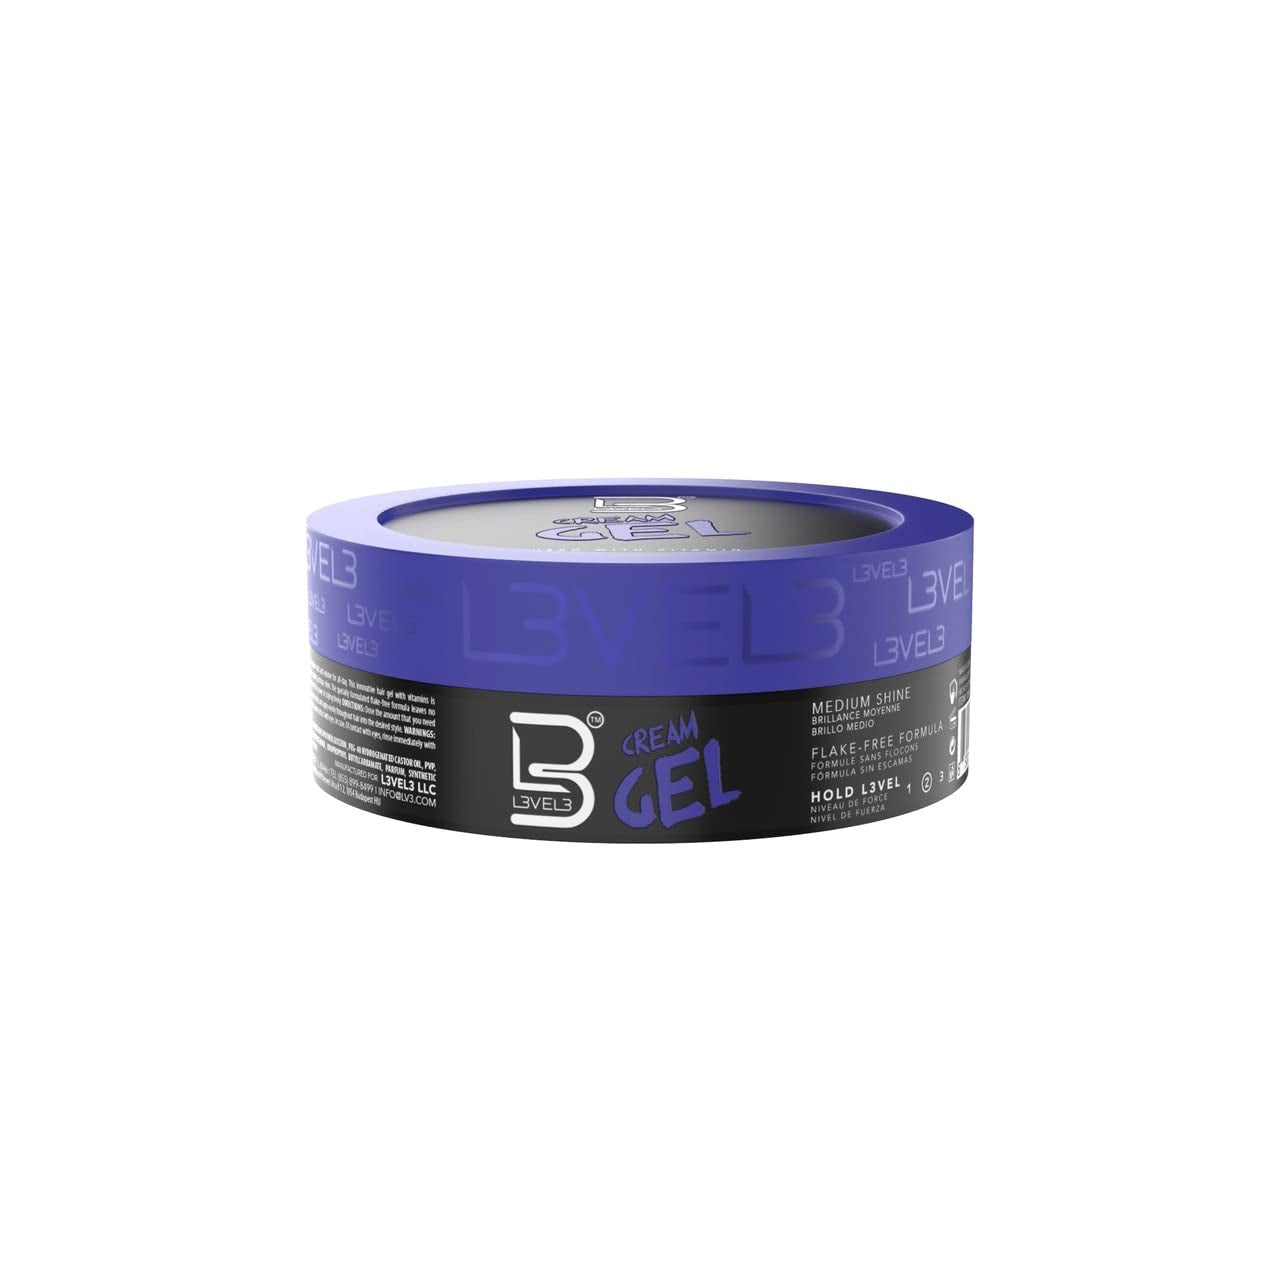 L3VEL3 Hair Styling Gel, Strong Hold & Shine